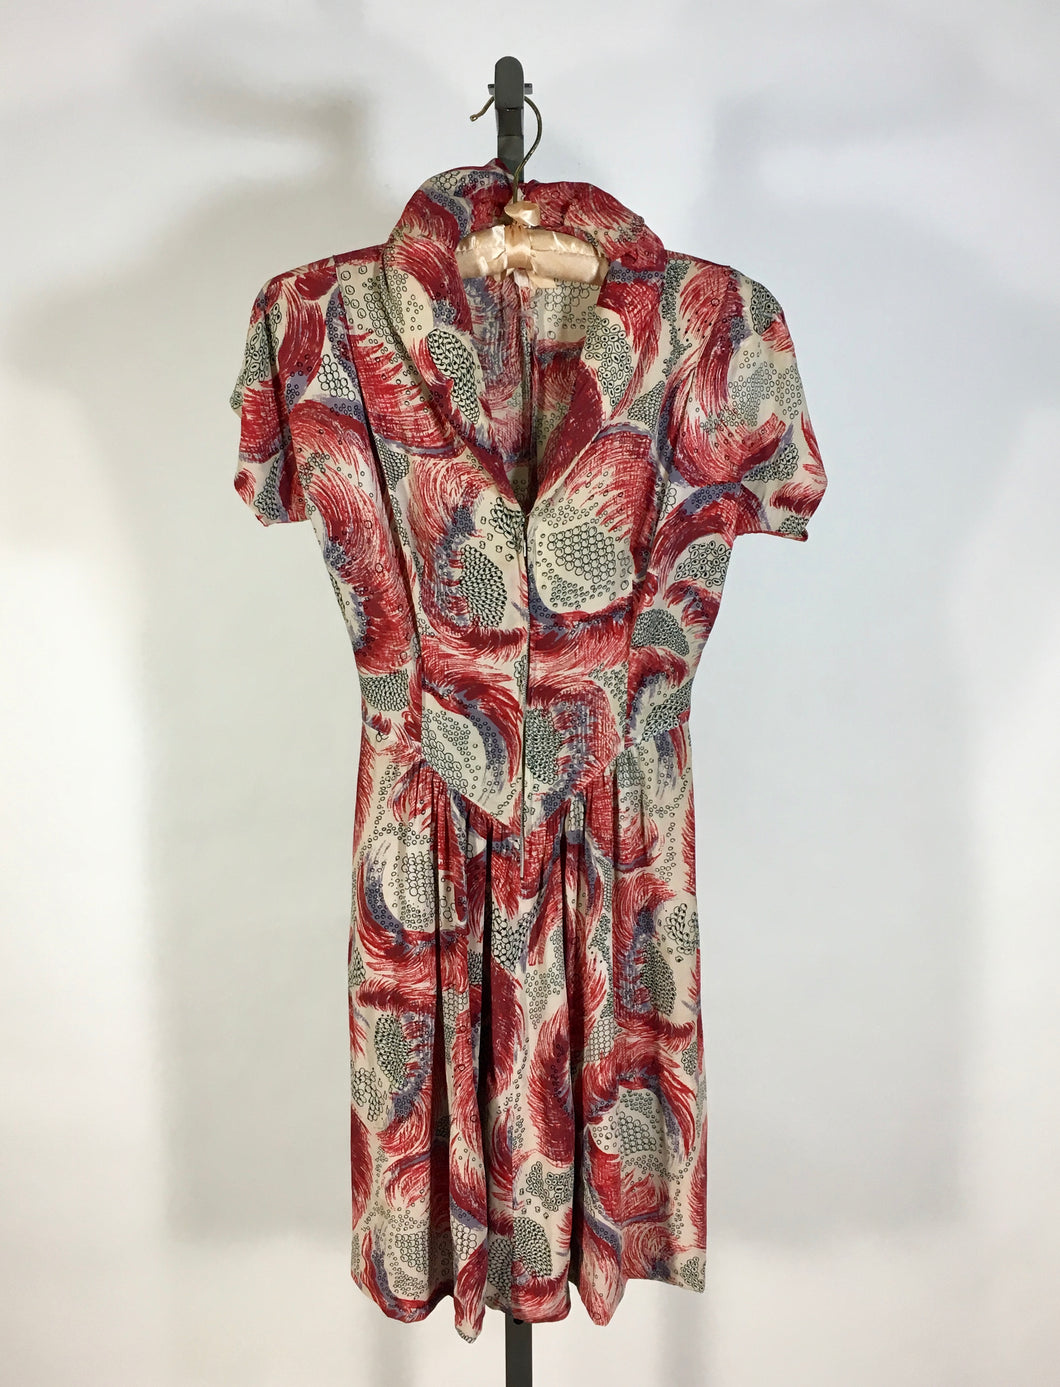 1930’s silk dress with dreamy ‘undersea’ style print and high rolled collar